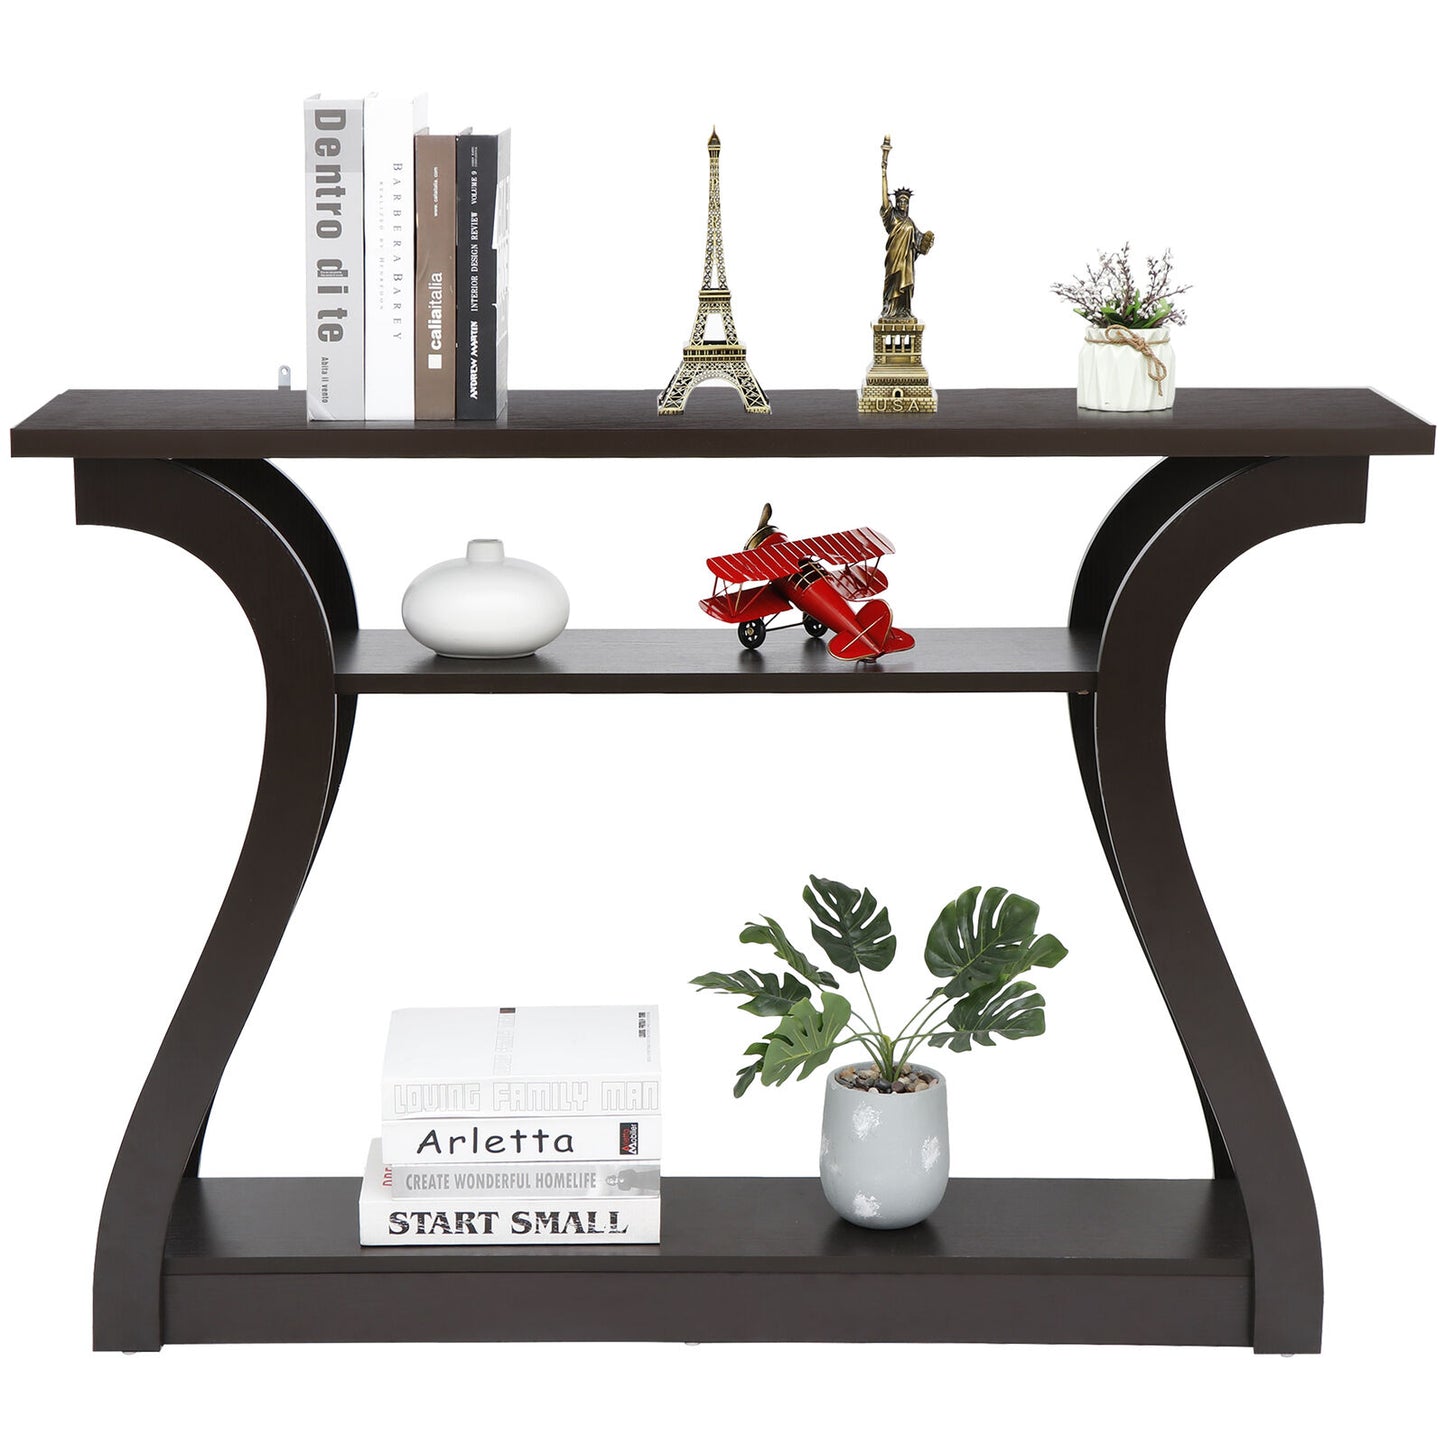 3 Tier Narrow Console Table 47" Accent Sofa Table Curved Legs with Storage Shelf